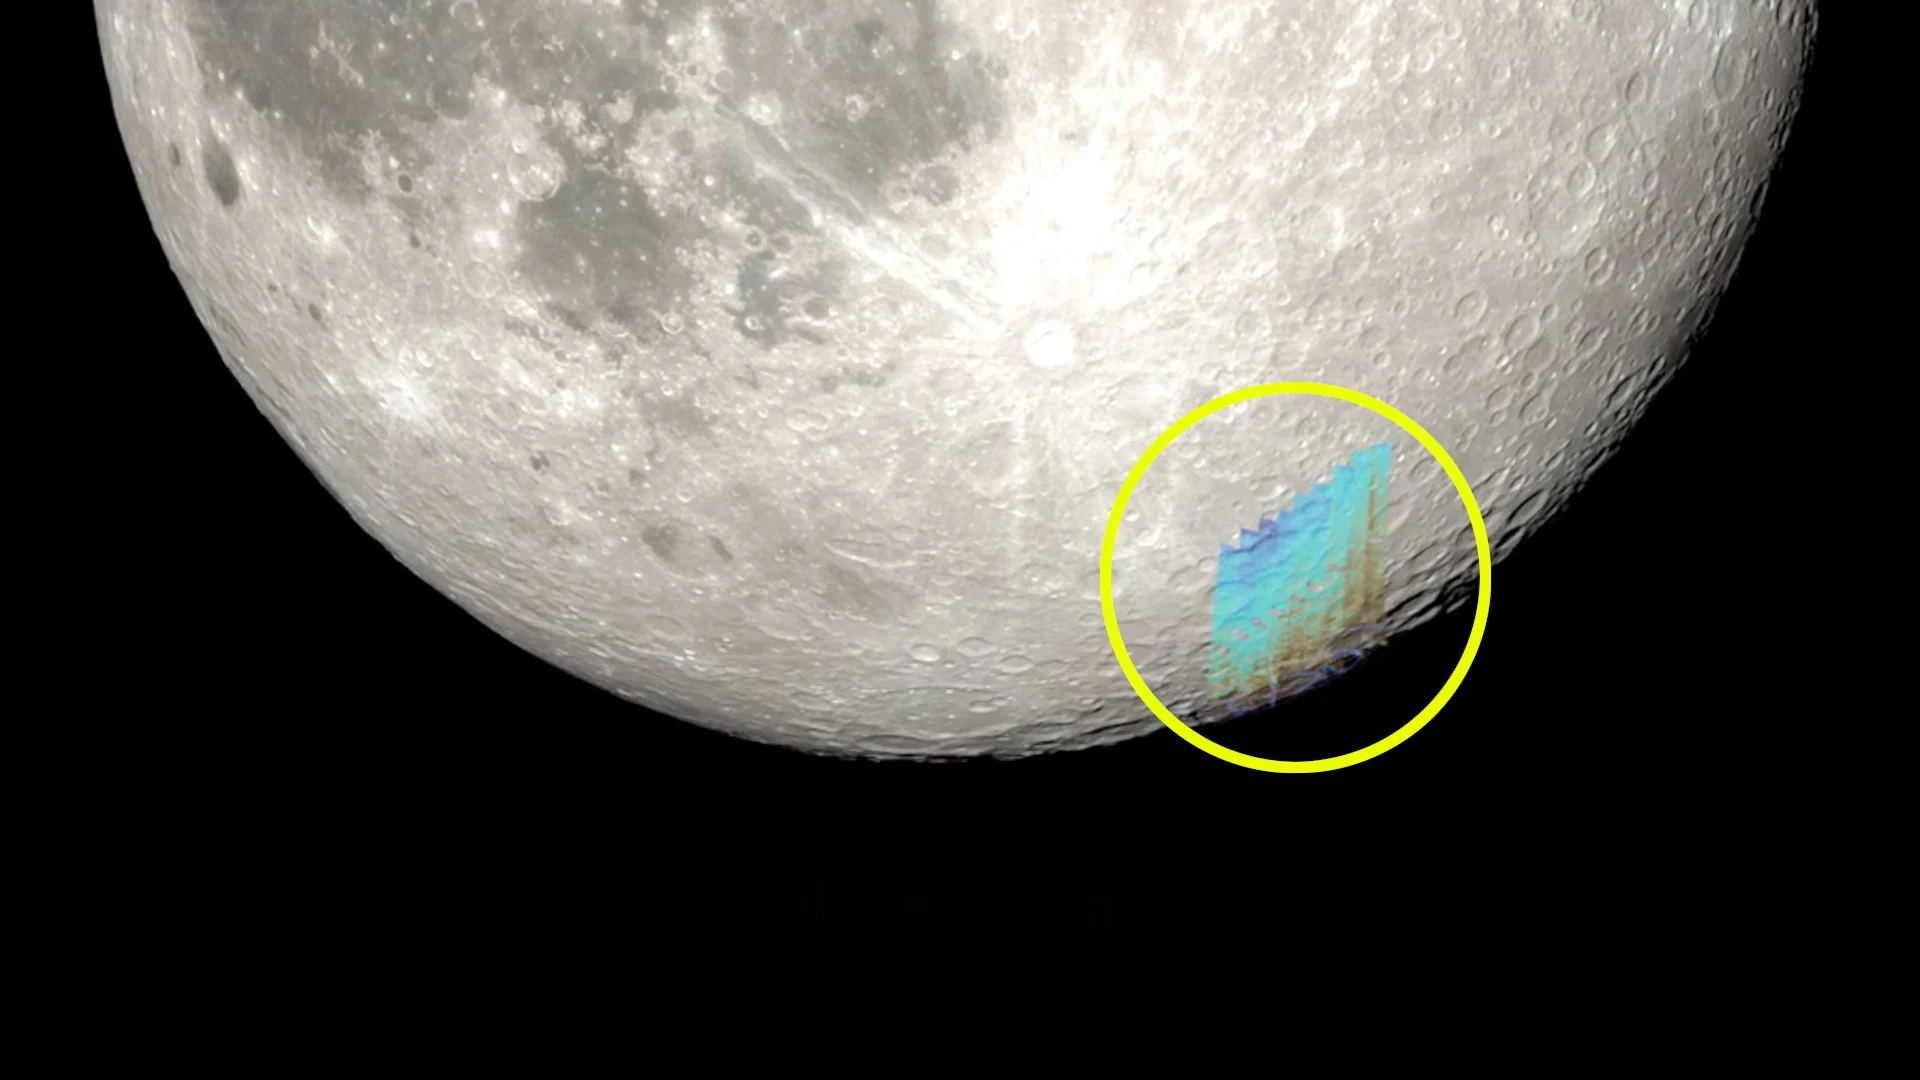 NASA has its first detailed map of water on the Moon